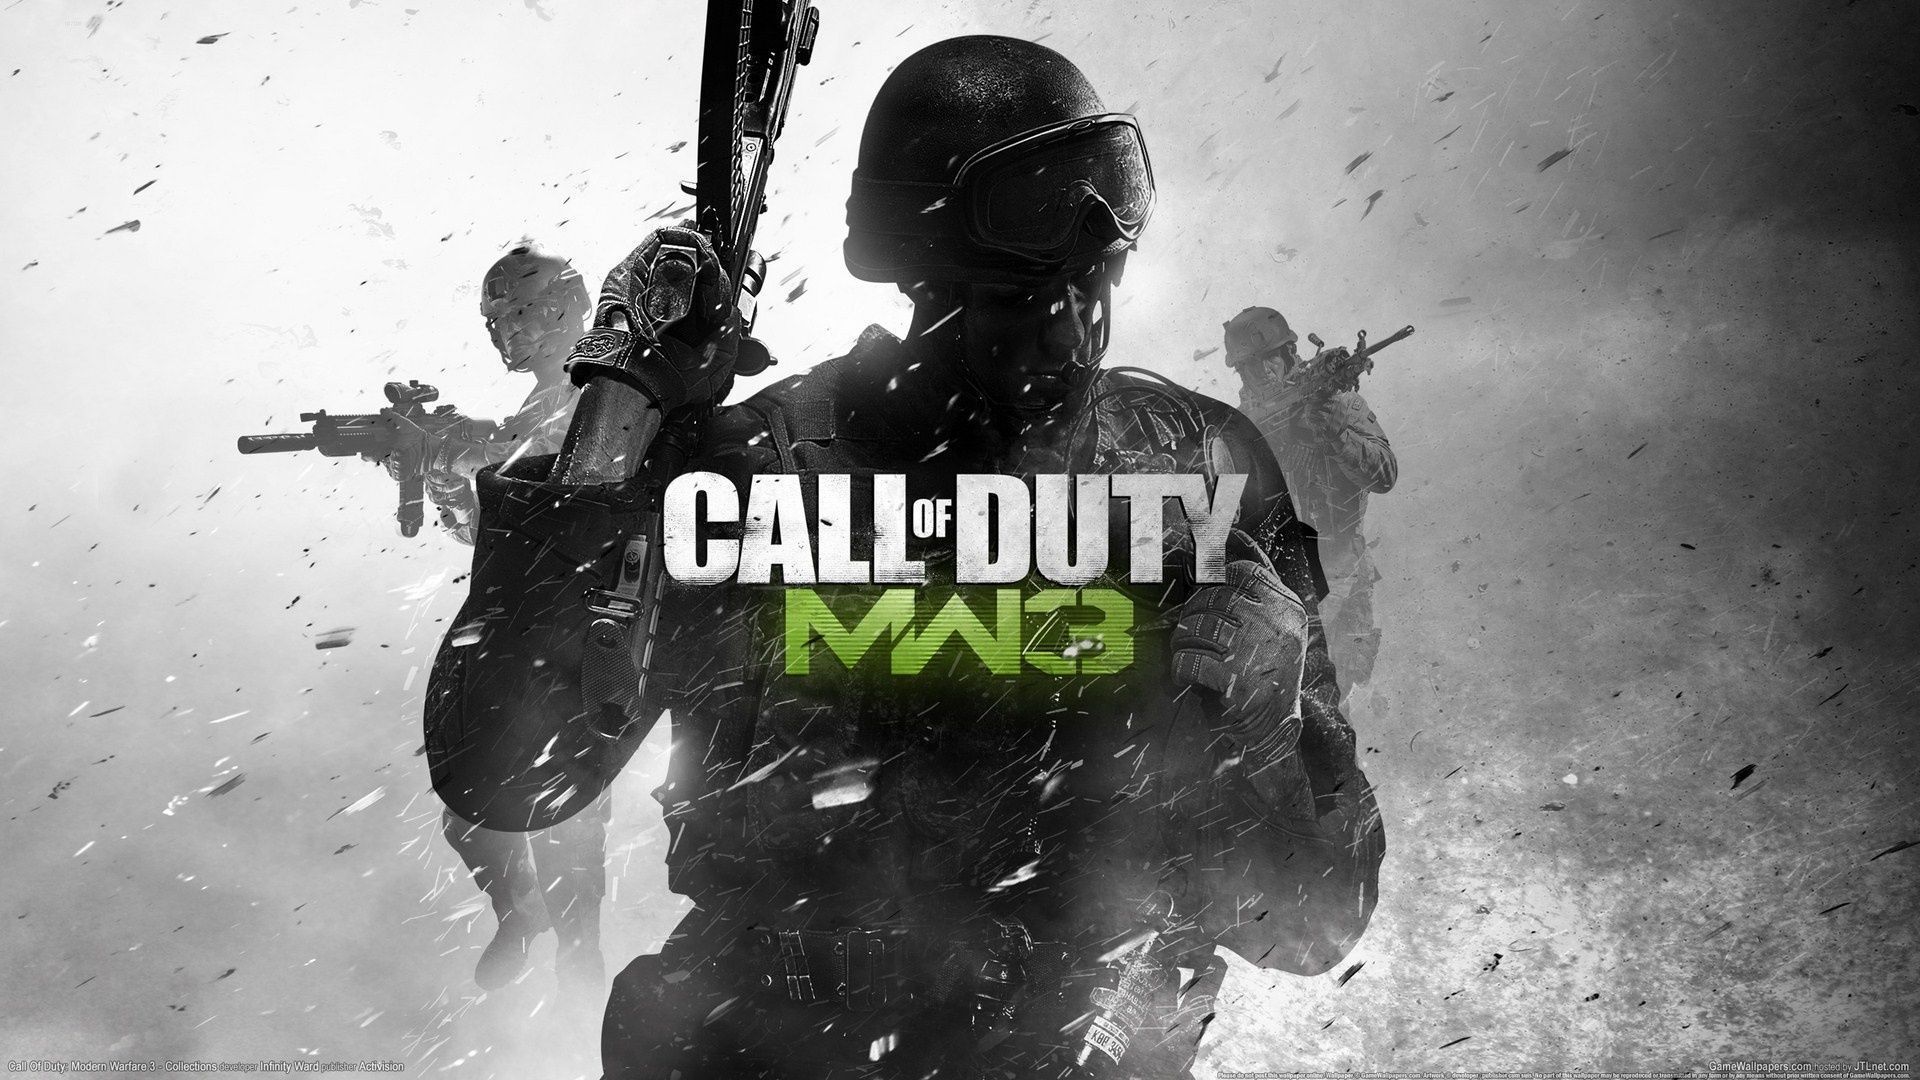 HD Quality War Game Call of Duty MW3 Wallpapers 6 Full Size